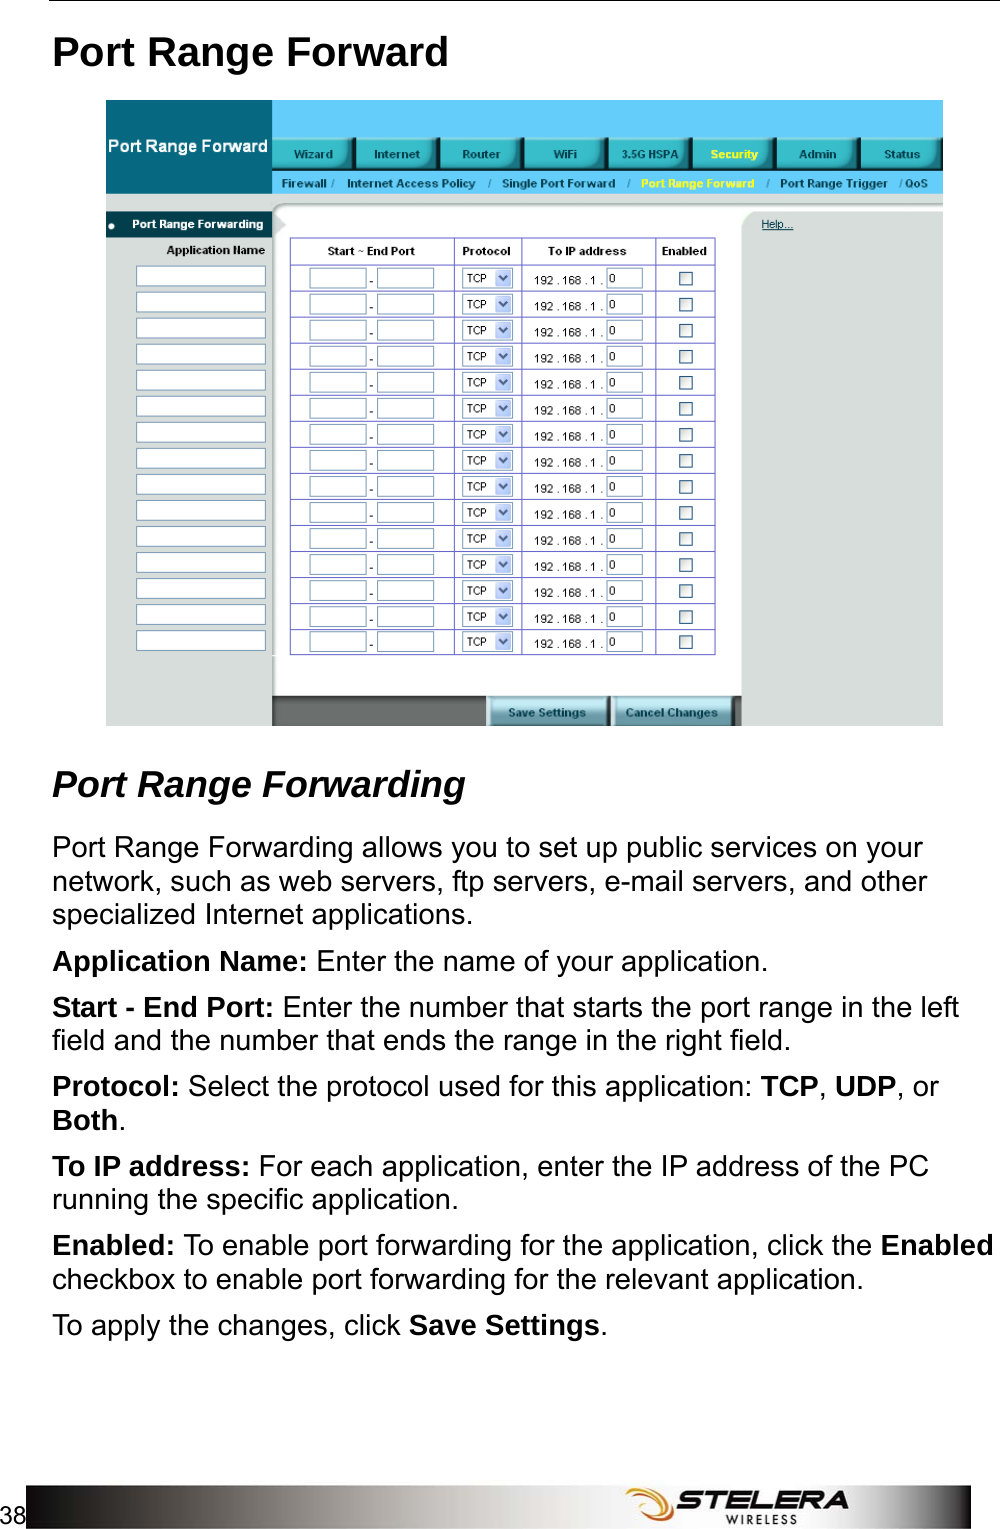 Security Setup 38   Port Range Forward  Port Range Forwarding   Port Range Forwarding allows you to set up public services on your network, such as web servers, ftp servers, e-mail servers, and other specialized Internet applications. Application Name: Enter the name of your application. Start - End Port: Enter the number that starts the port range in the left field and the number that ends the range in the right field. Protocol: Select the protocol used for this application: TCP, UDP, or Both. To IP address: For each application, enter the IP address of the PC running the specific application. Enabled: To enable port forwarding for the application, click the Enabled checkbox to enable port forwarding for the relevant application. To apply the changes, click Save Settings. 